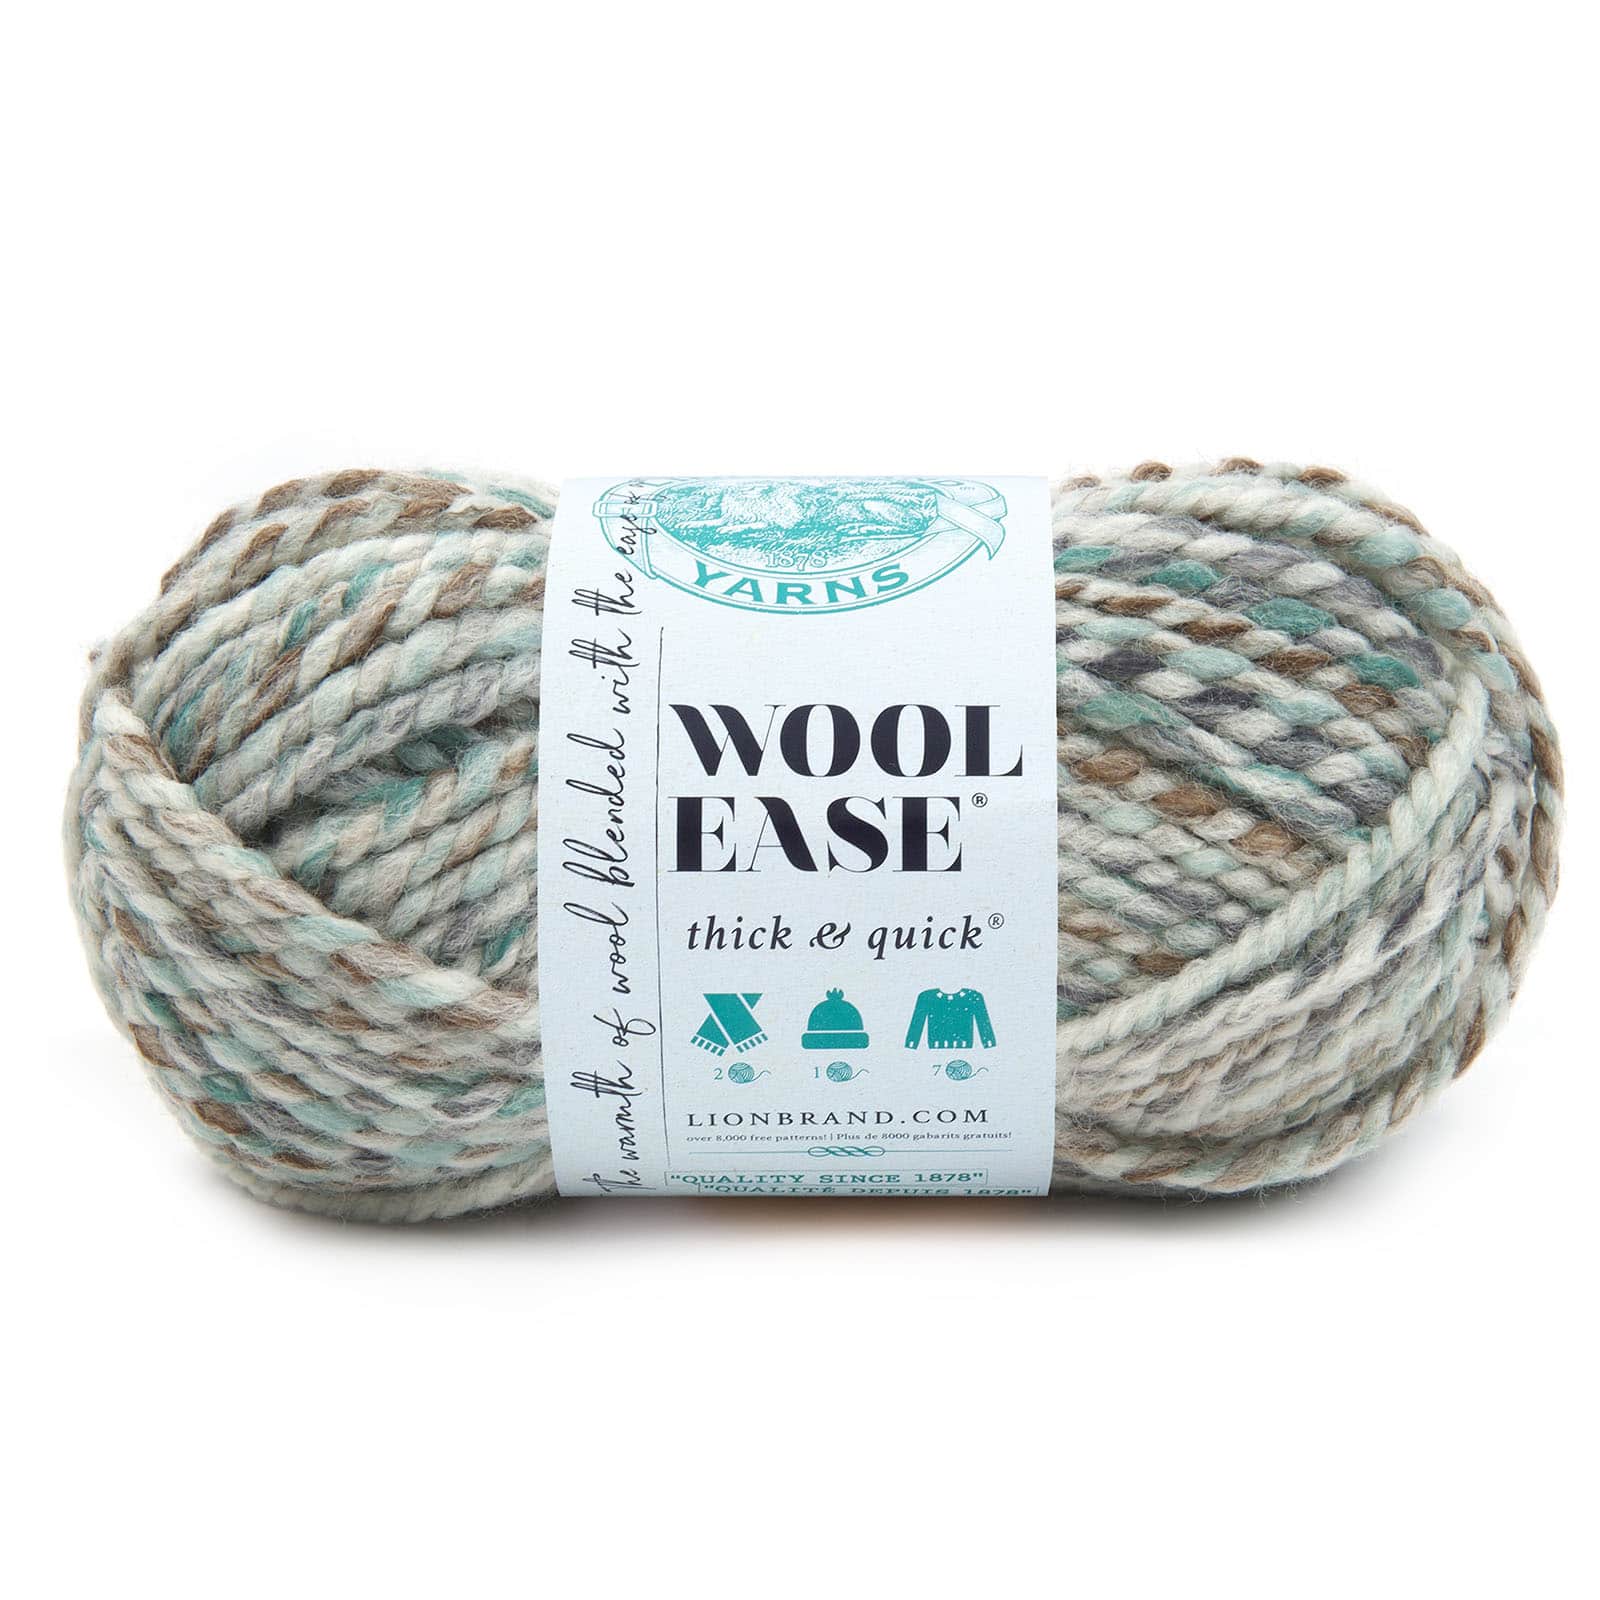 15 Pack: Lion Brand® Wool-Ease® Thick & Quick® Variegated Yarn 